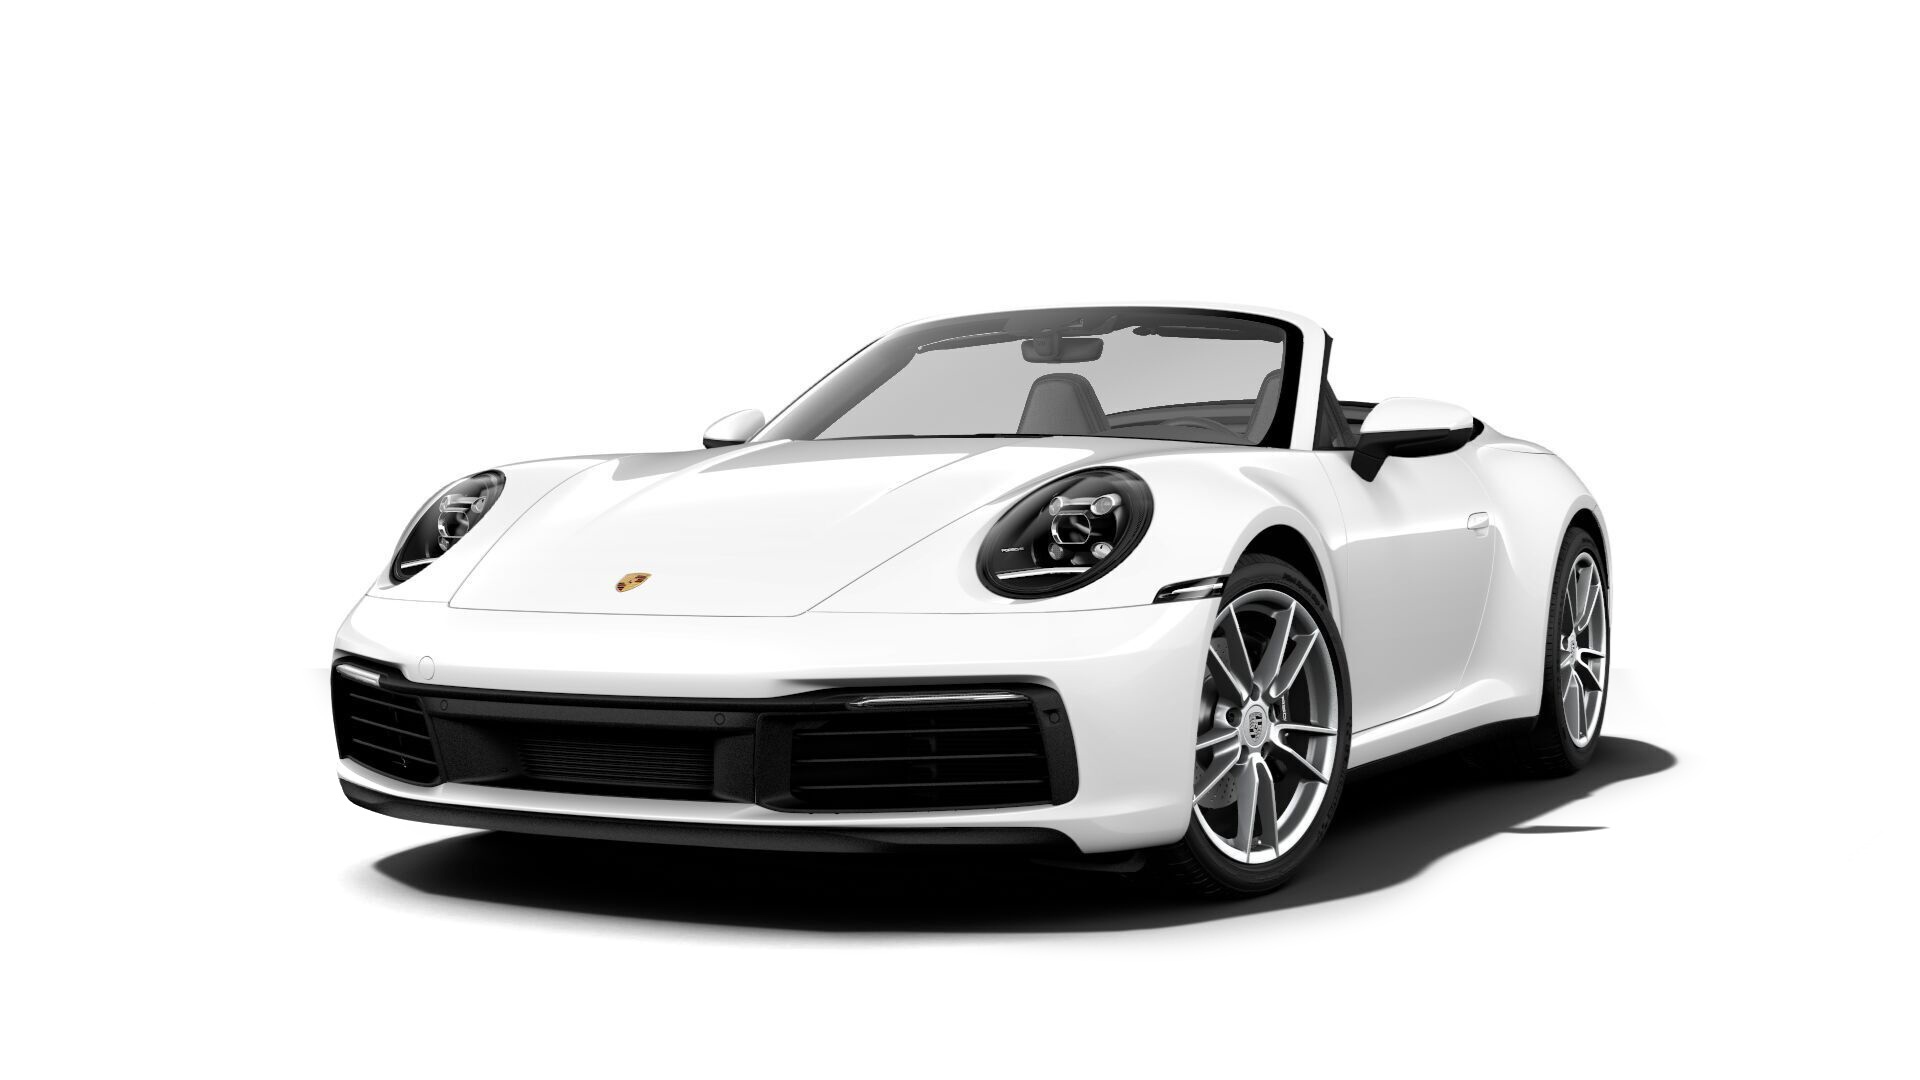 2022 Porsche 911 Carrera S Cabriolet Full Specs, Features and Price |  CarBuzz